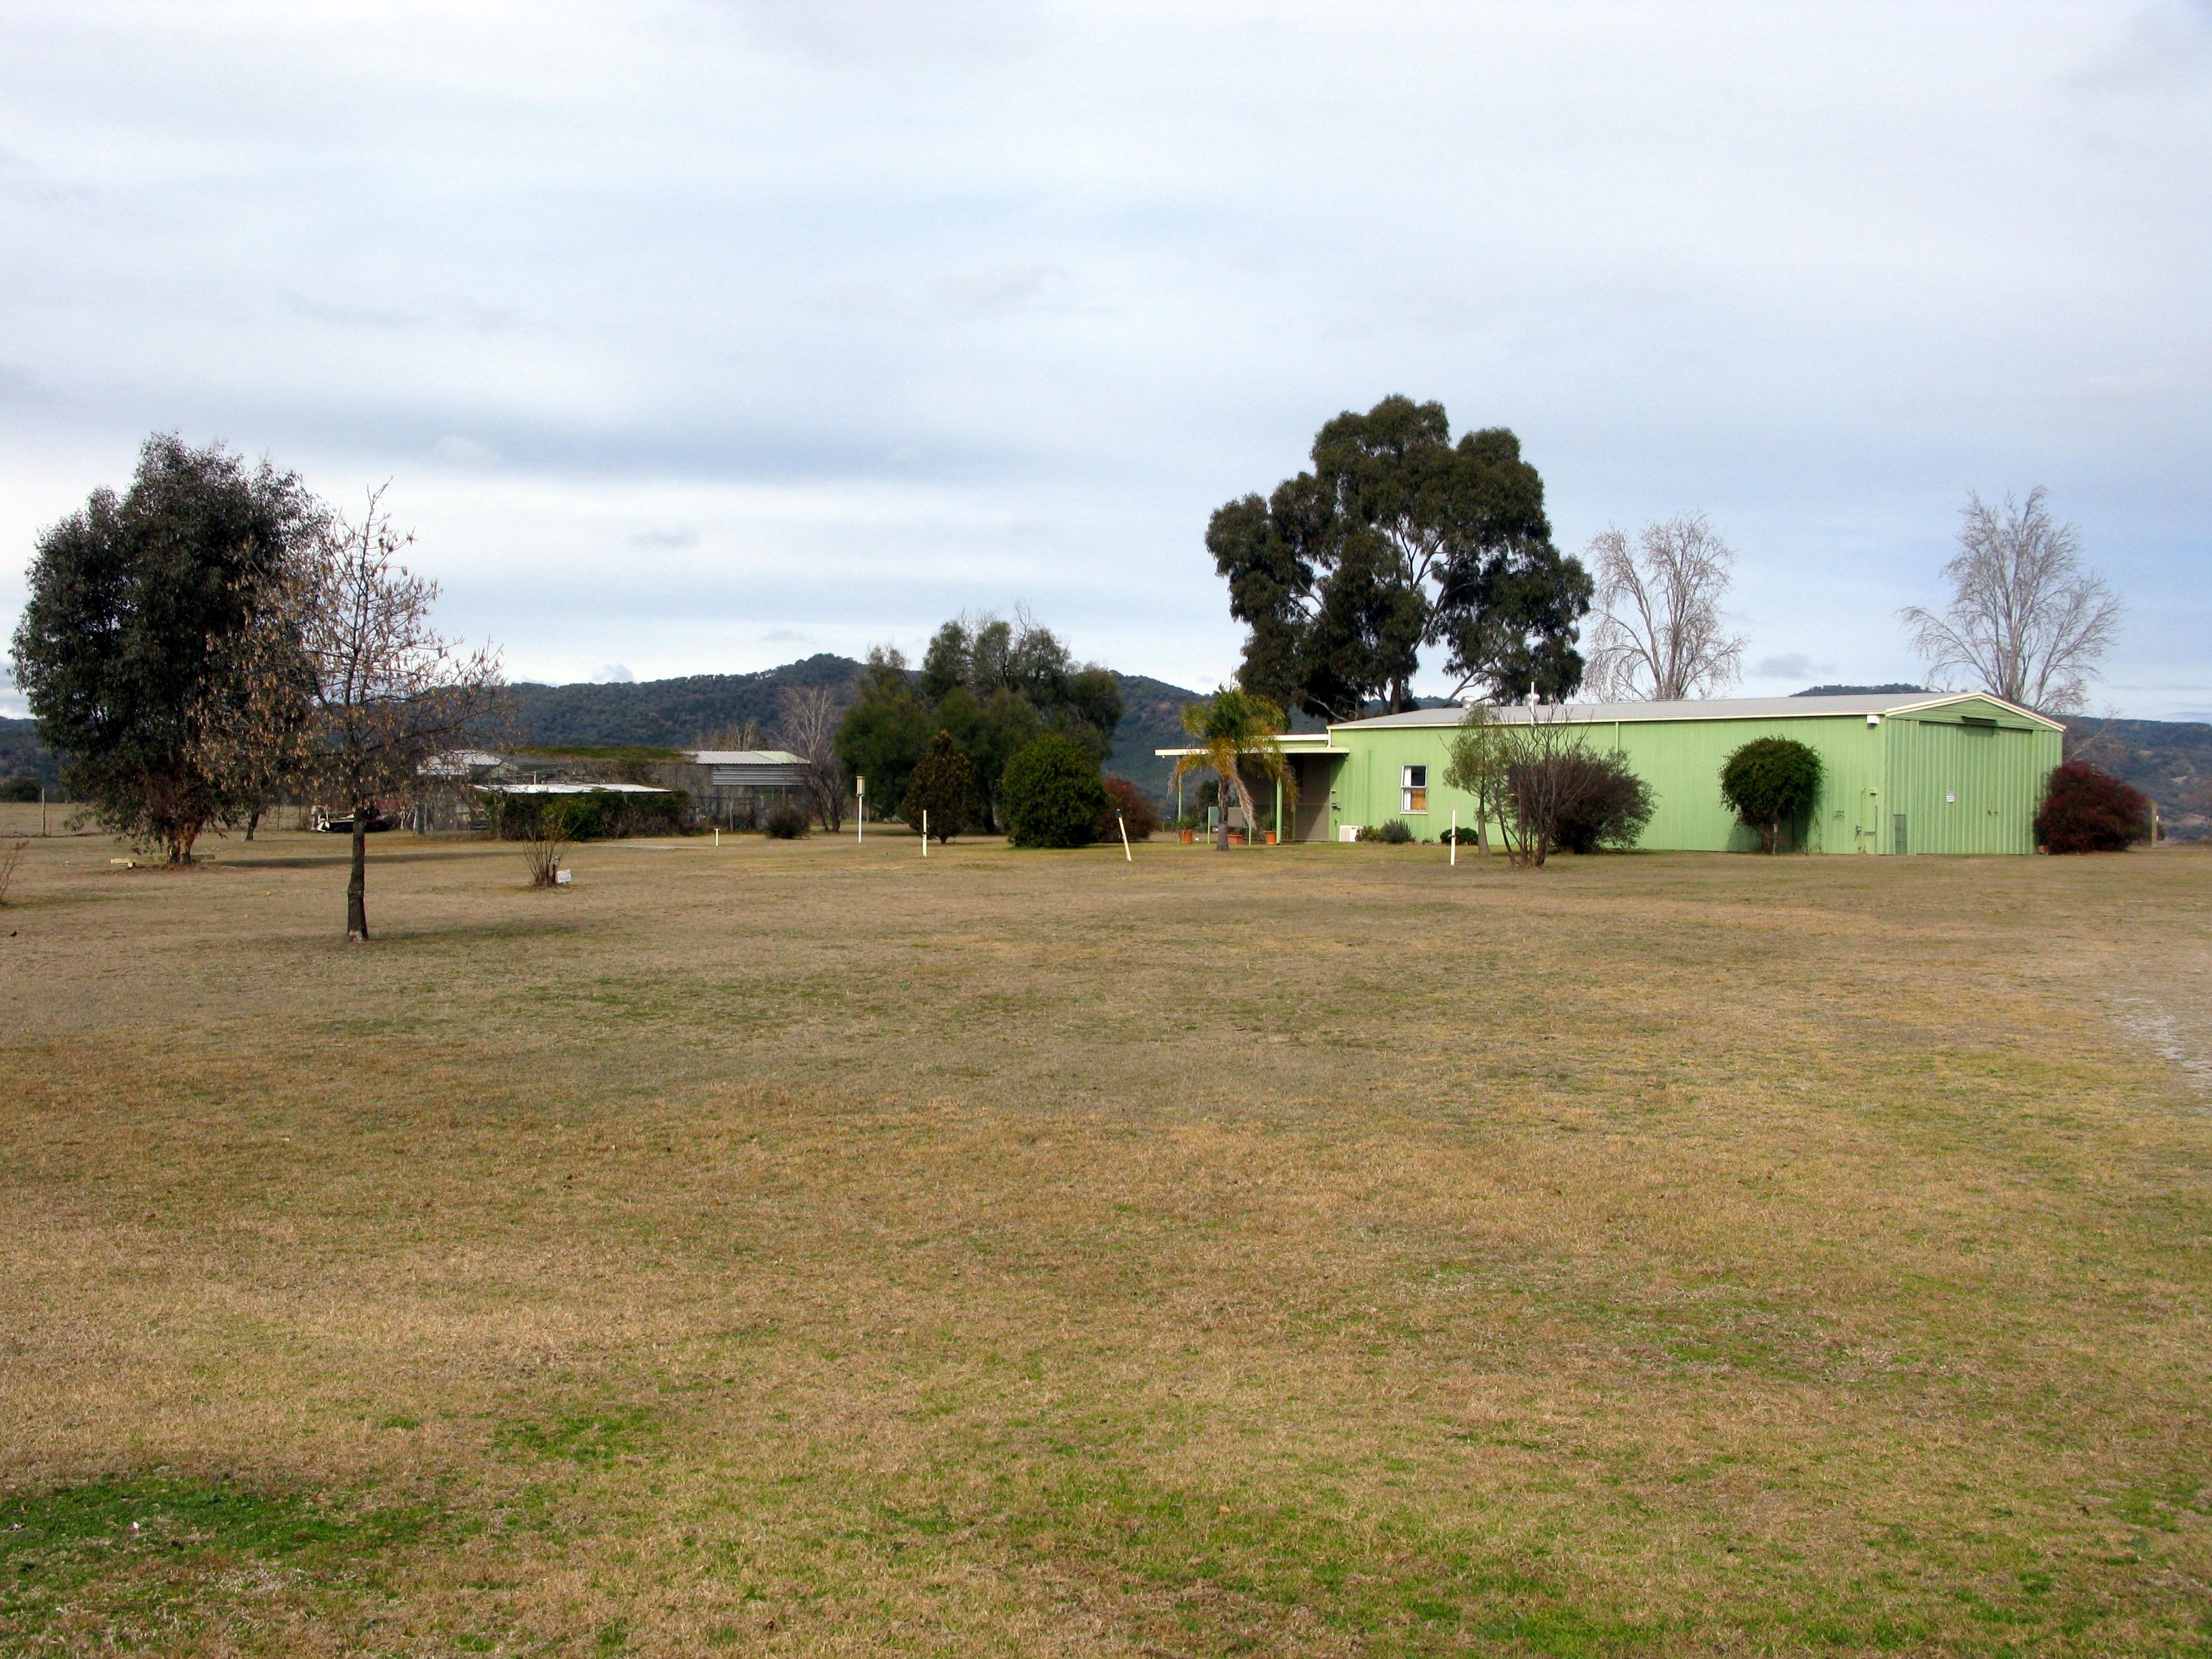 Kootingal Kourt Caravan Park - Kootingal: Area for tents and camping - not sure what the distant shed contains.